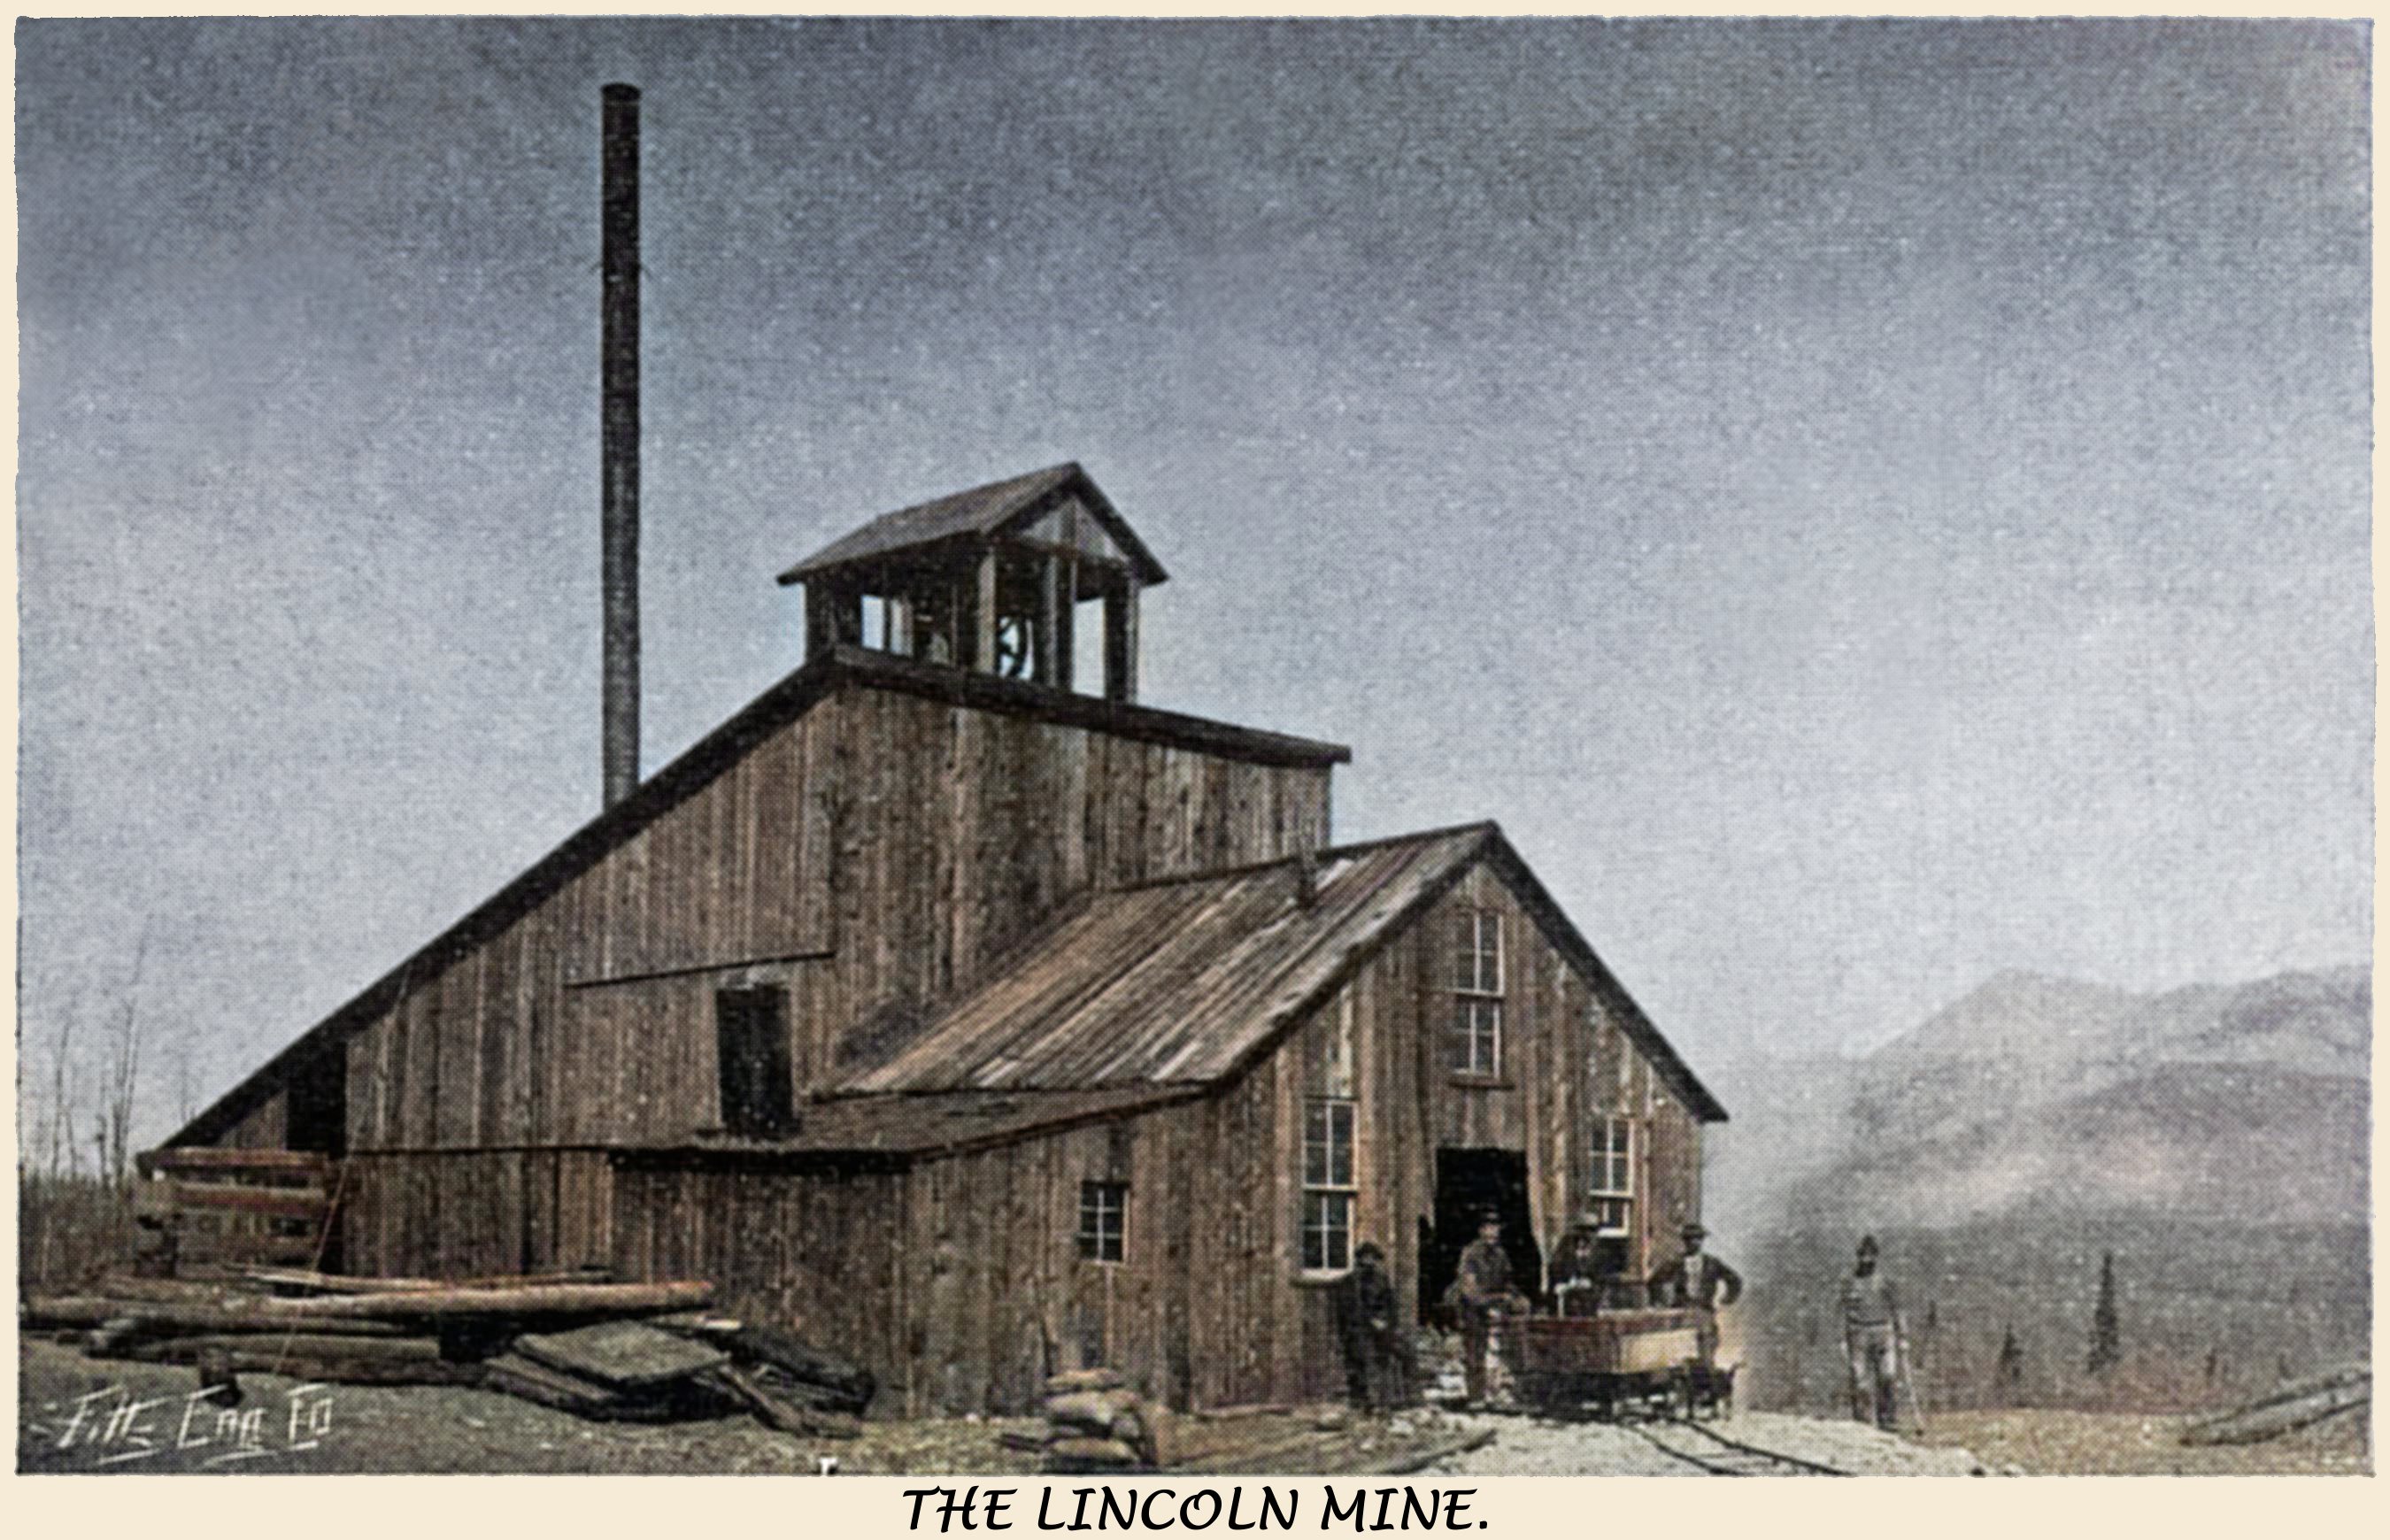 This is sadly not the best quality, but due to the size it is a useable print-based edition of this view from around 1896, showing the Lincoln Shaft House of the Lincoln mine group on Lincoln Hill, in the northern end of the District, northwest of Gillett. Glad I have it, it is the best I have, as it is the only one that I ever seen!
   The scene itself shows five men posing with an ore-car and a dog, in front of the entryway into their shaft house, with the Pike's Peak Range in background right. It is a somewhat large structure, two roof shapes, and an open cupola covering the top of the gallows/head-frame, and a high smokestack.
   I did procure the colored version of this image, if that is what you see. Source was dark grayish, or in common speech black & white. Used an online service and tweaked and worked with image to get what looks best to my eyes at the moment.